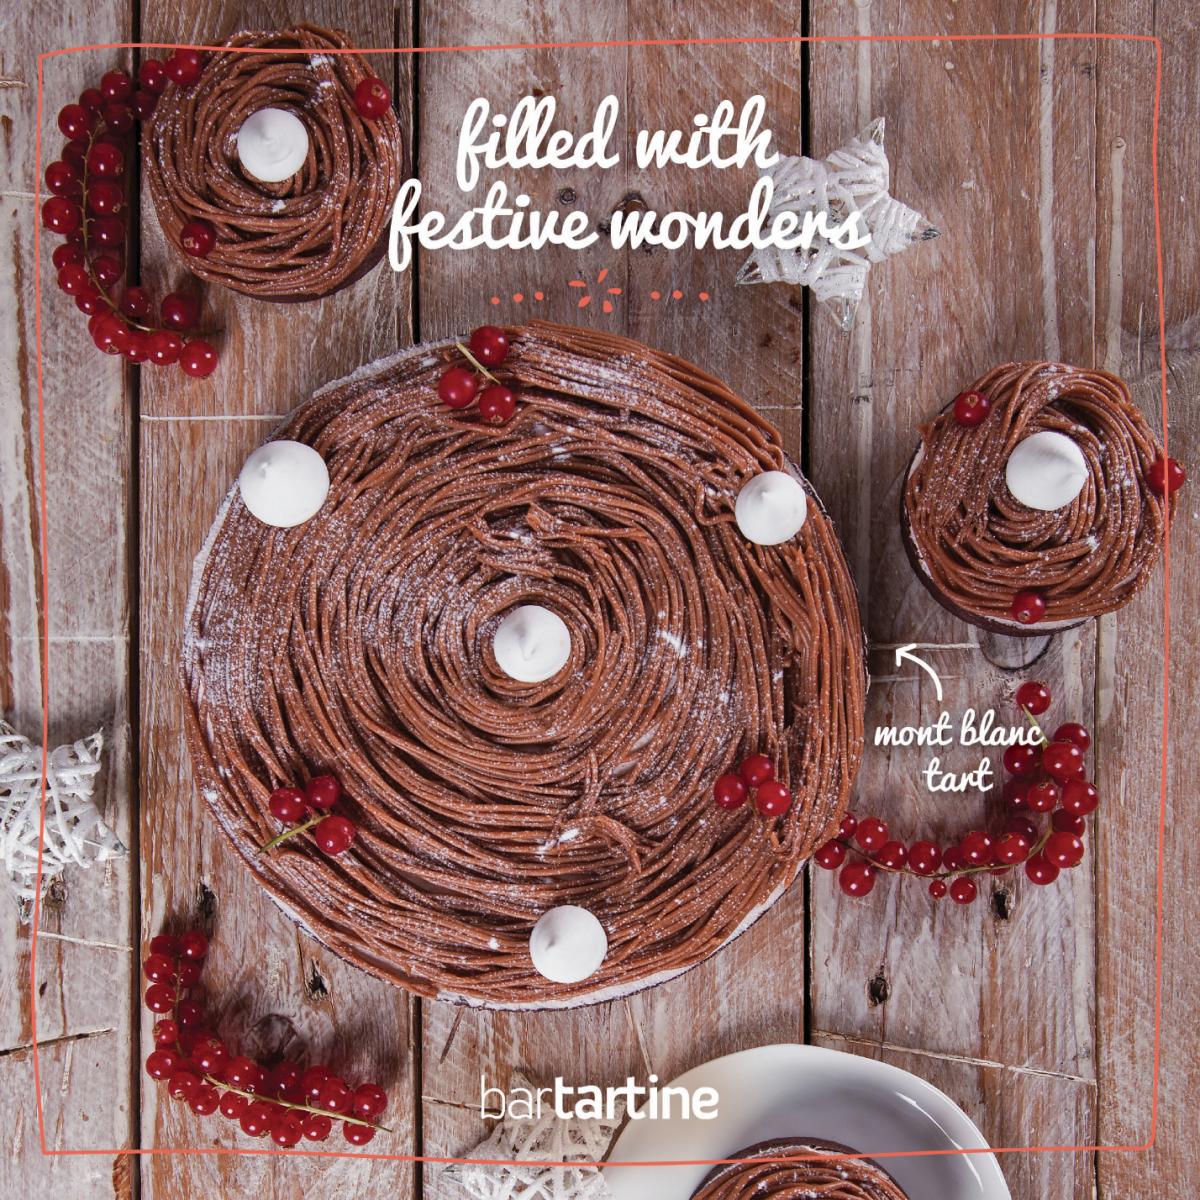 Filled with Festive Wonders: Mont Blanc Tart!